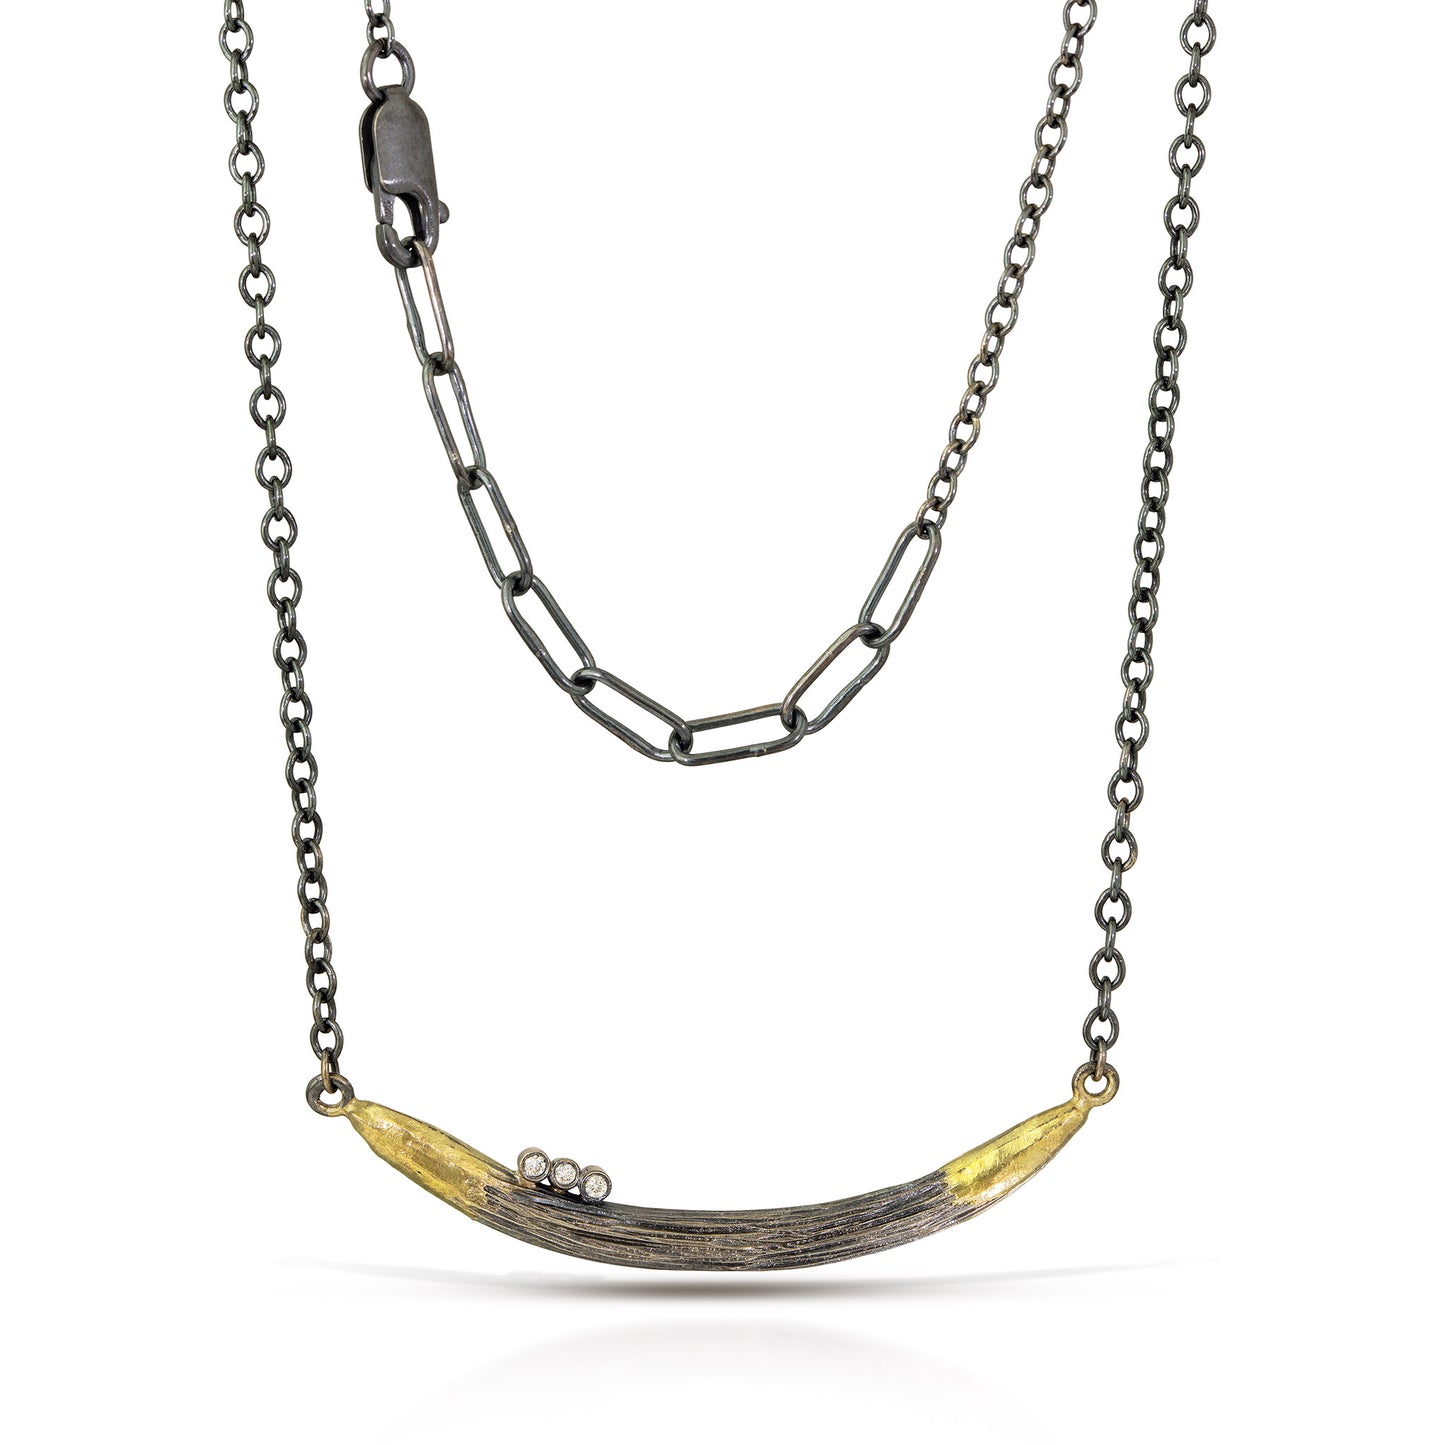 Black & Gold Bull Necklace